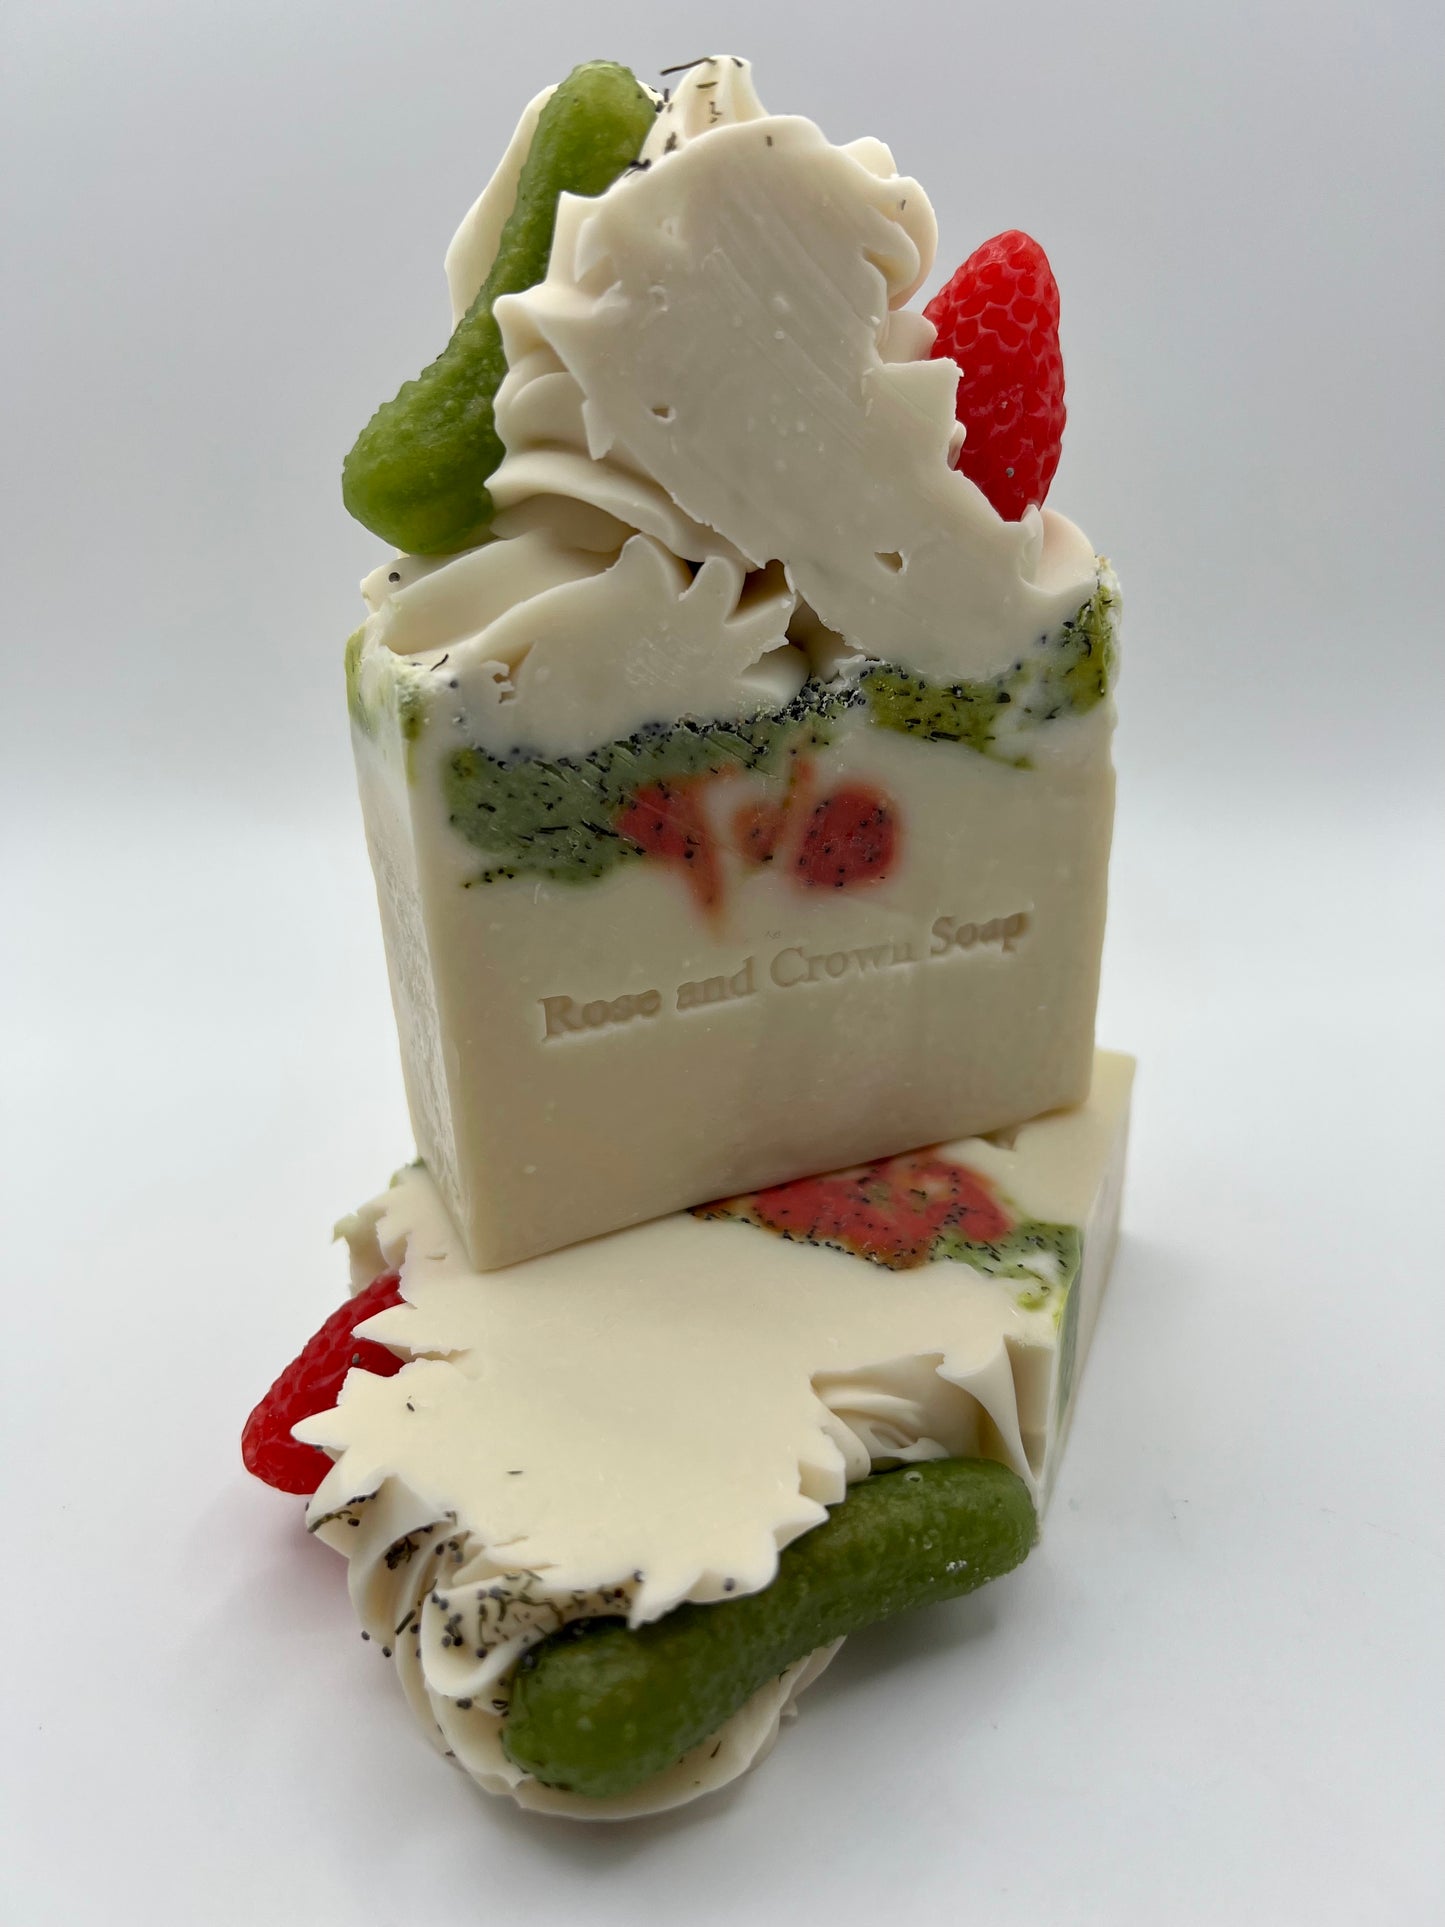 The Strawberry & Dill-Ishious Bar